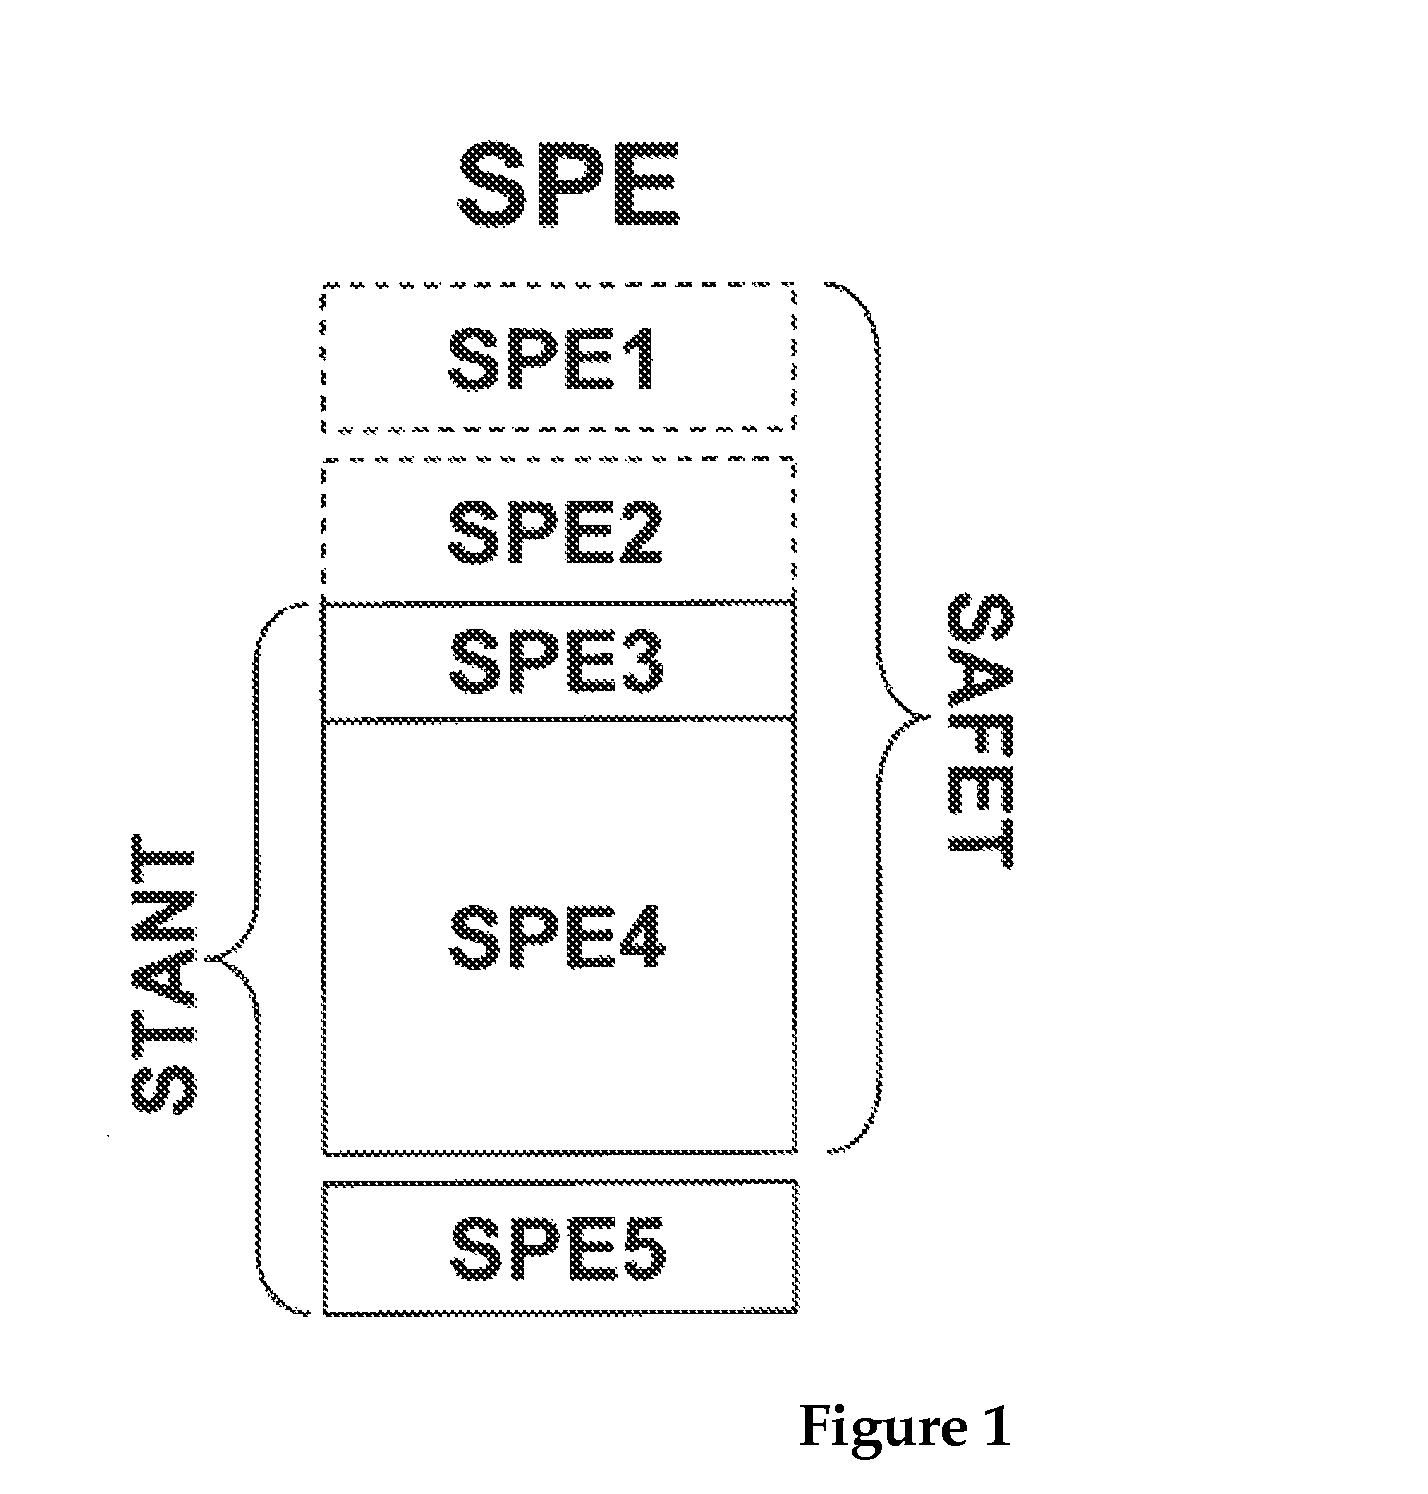 Method for executing security-relevant and non-security-relevant software components on a hardware platform